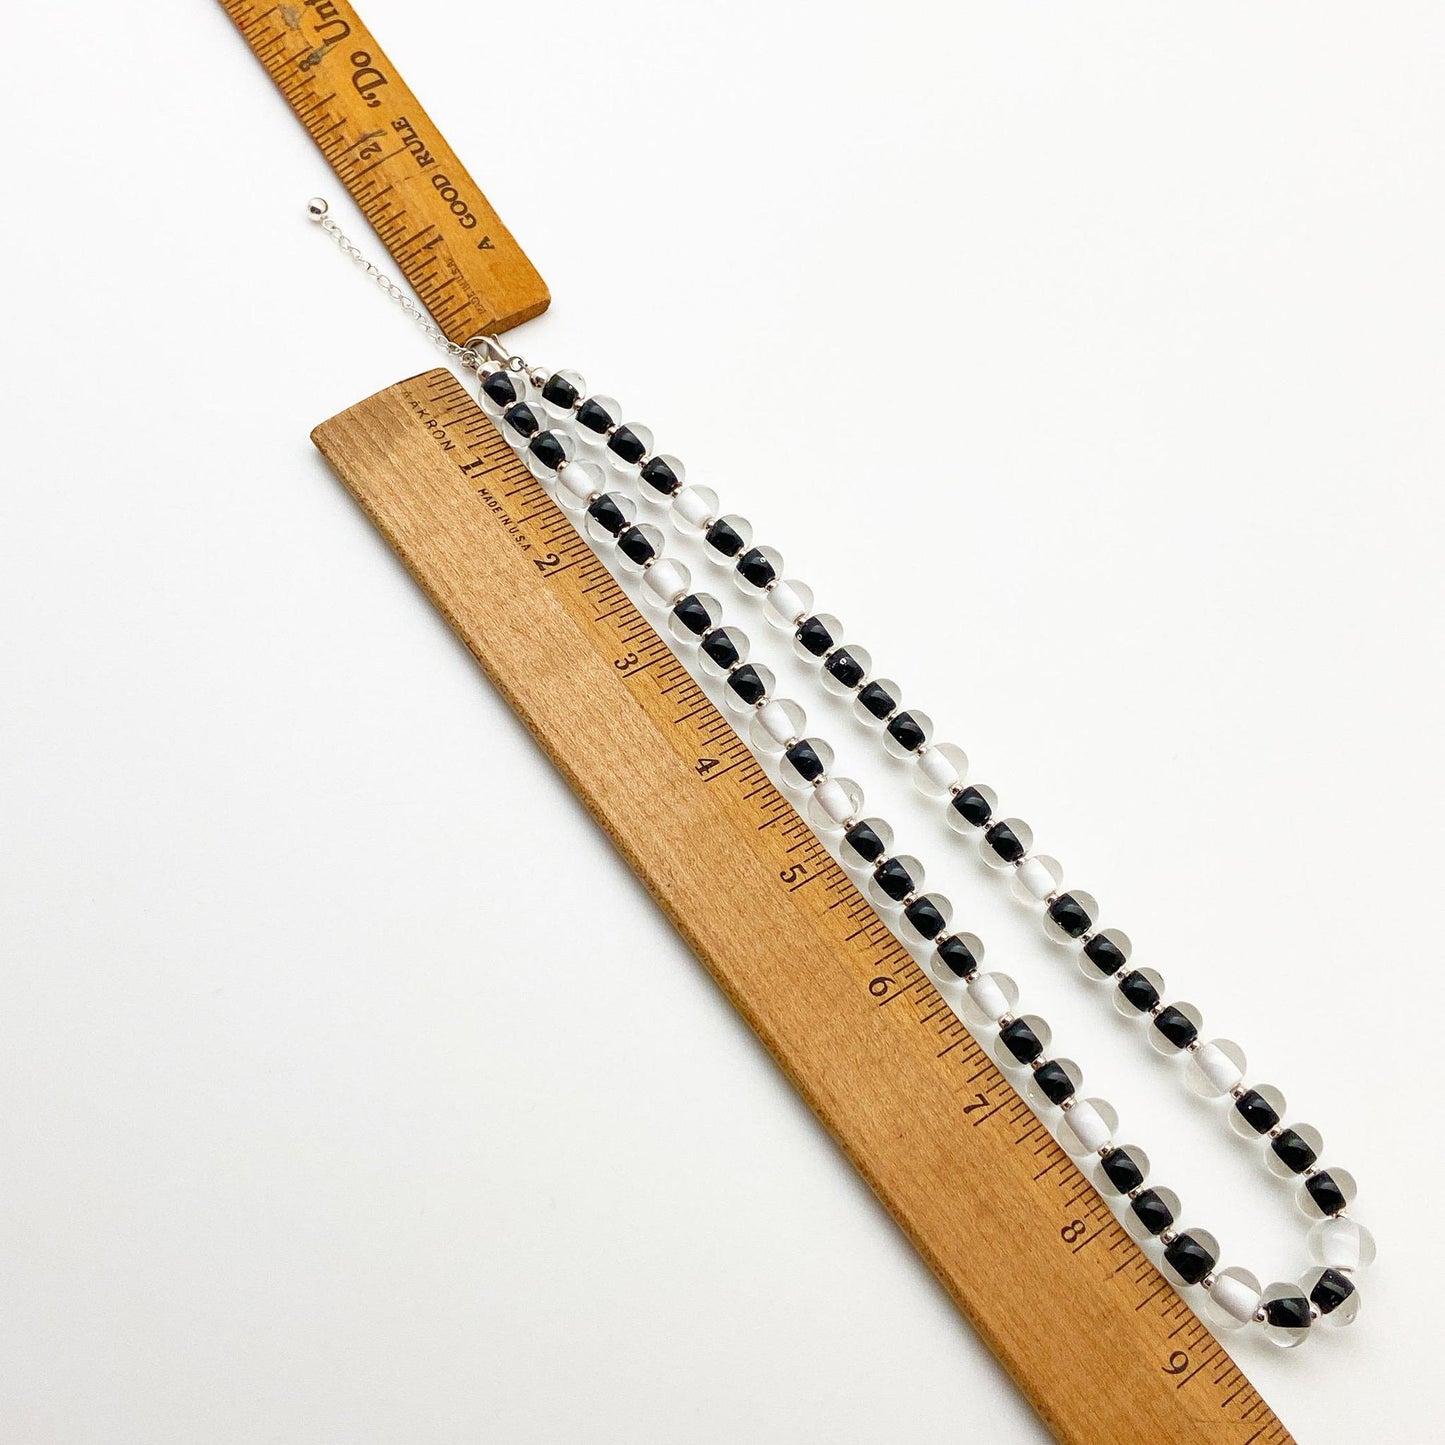 Necklace - Black and White Glass Beads - Handmade Glass - 18"